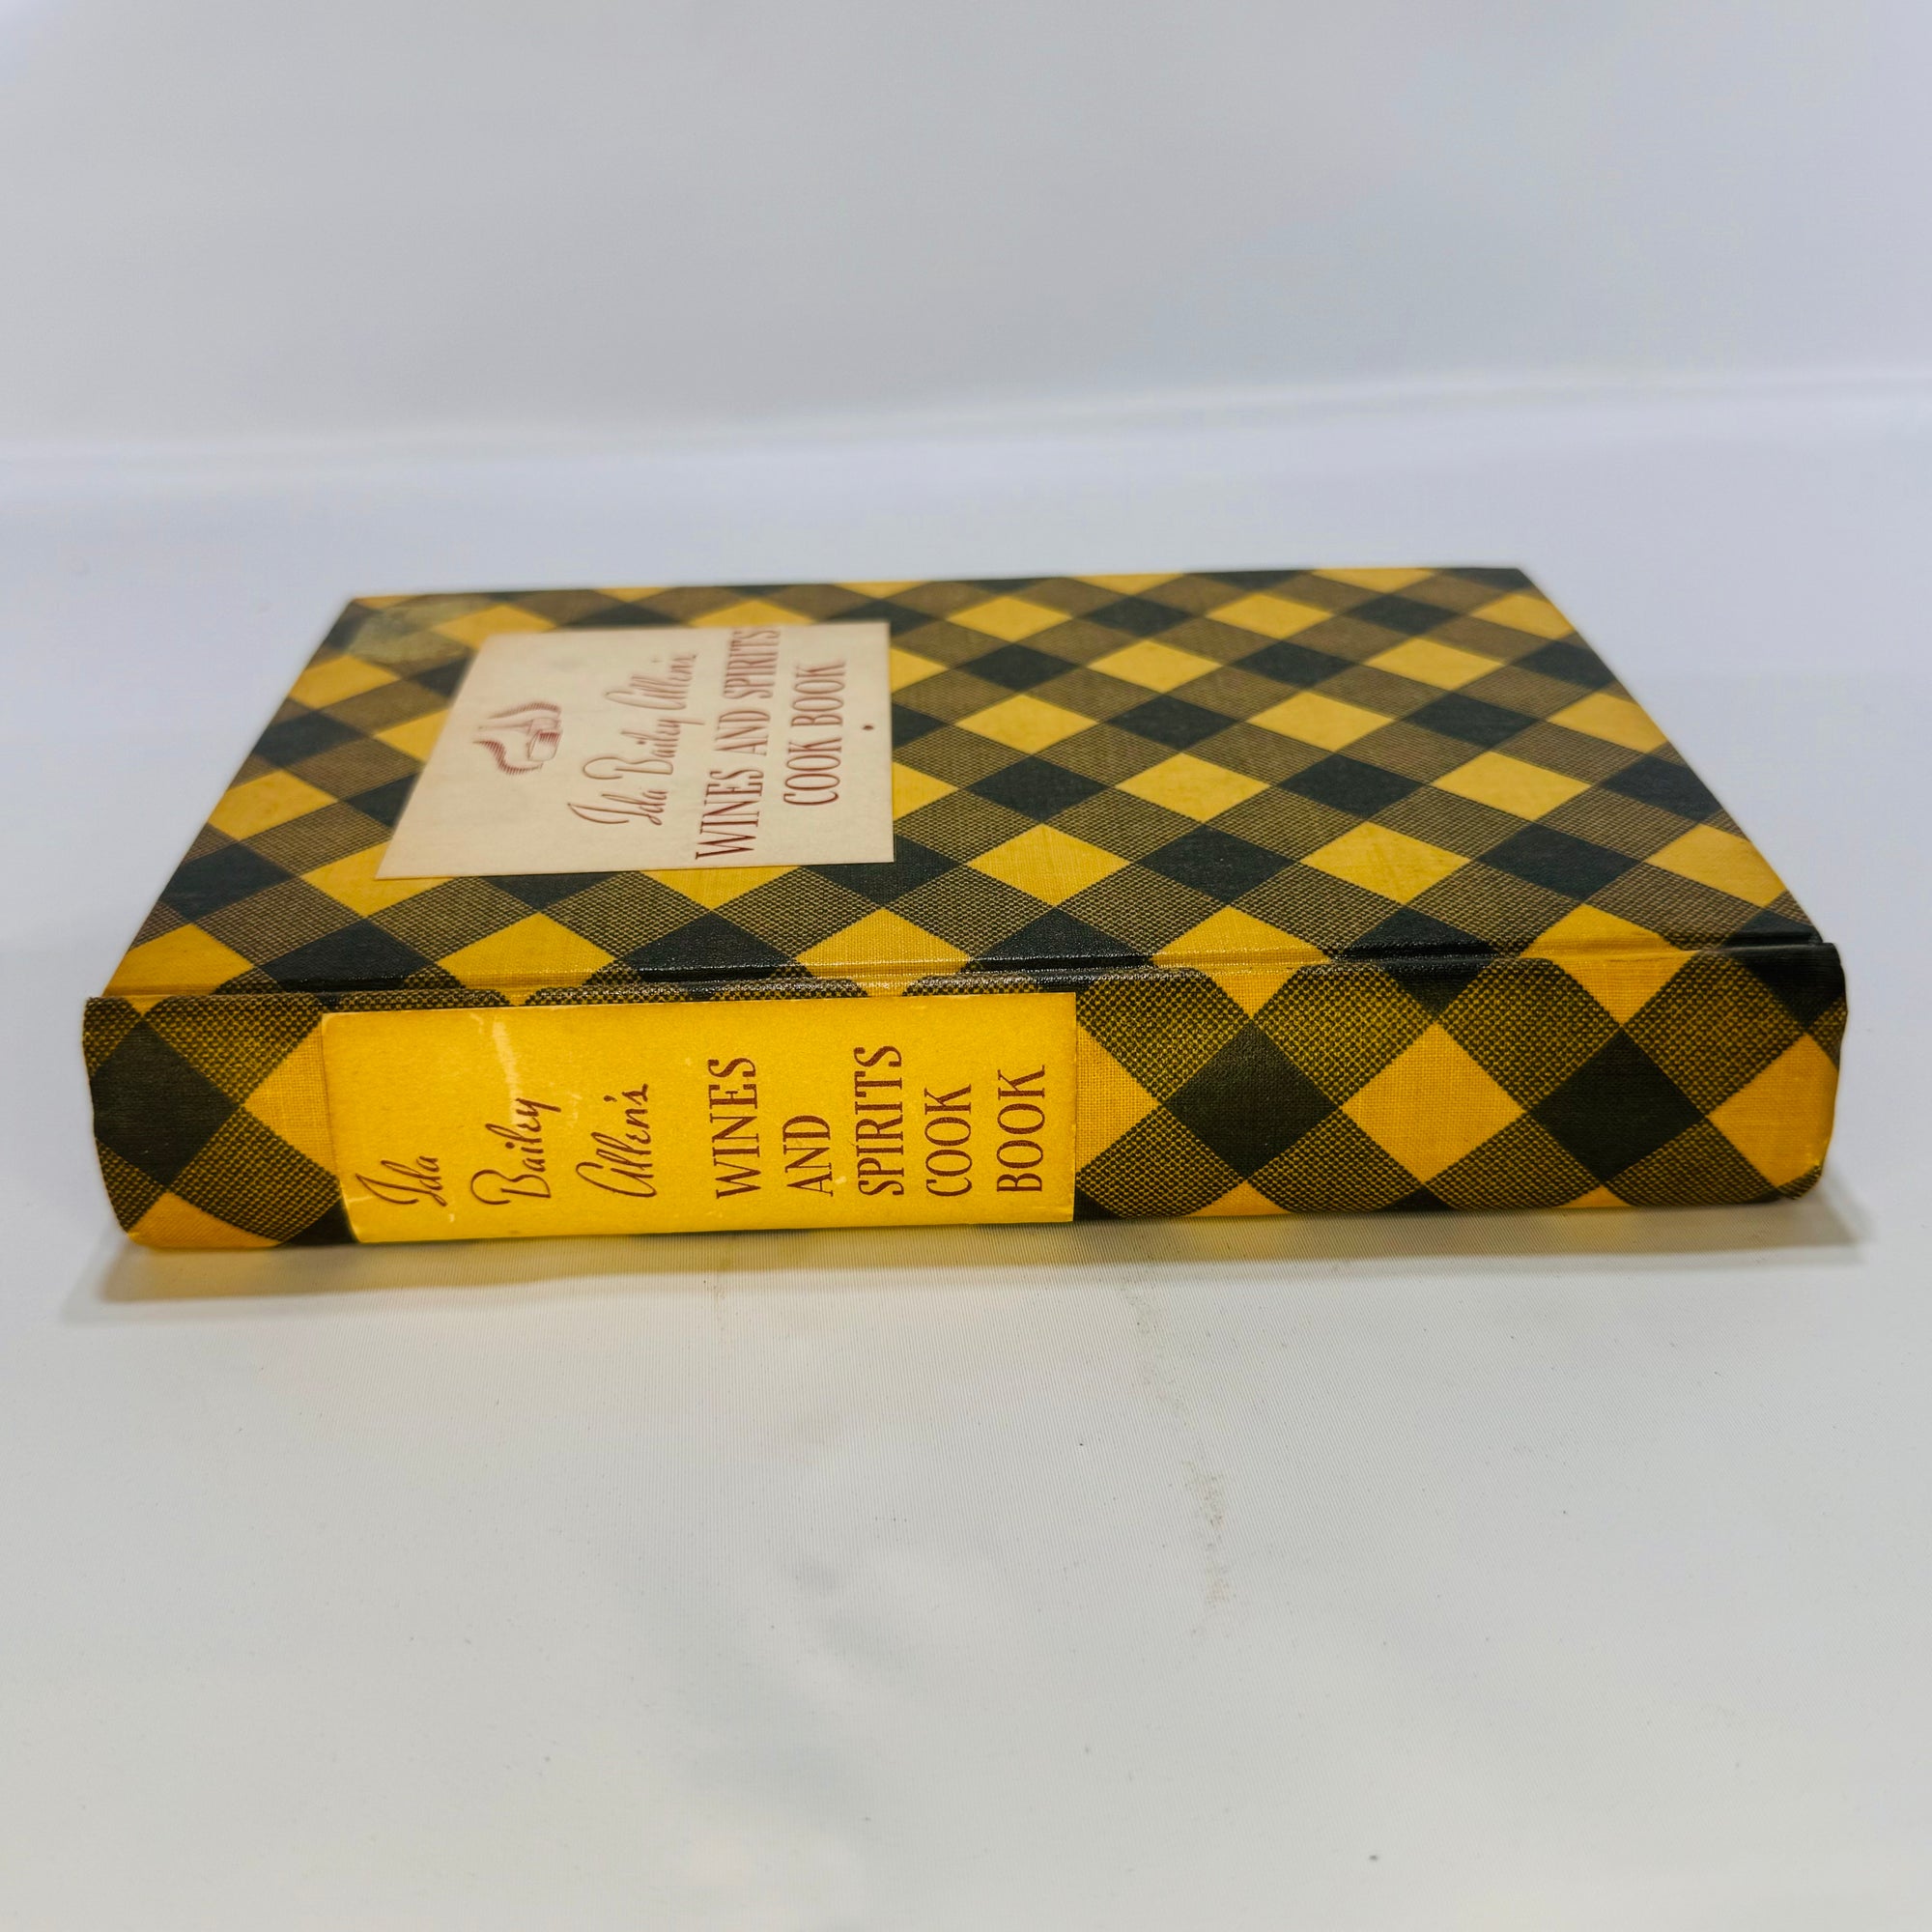 Ida Bailey Allen's Wines and Spirits Cook book 1934 Simon and Schuster, Inc